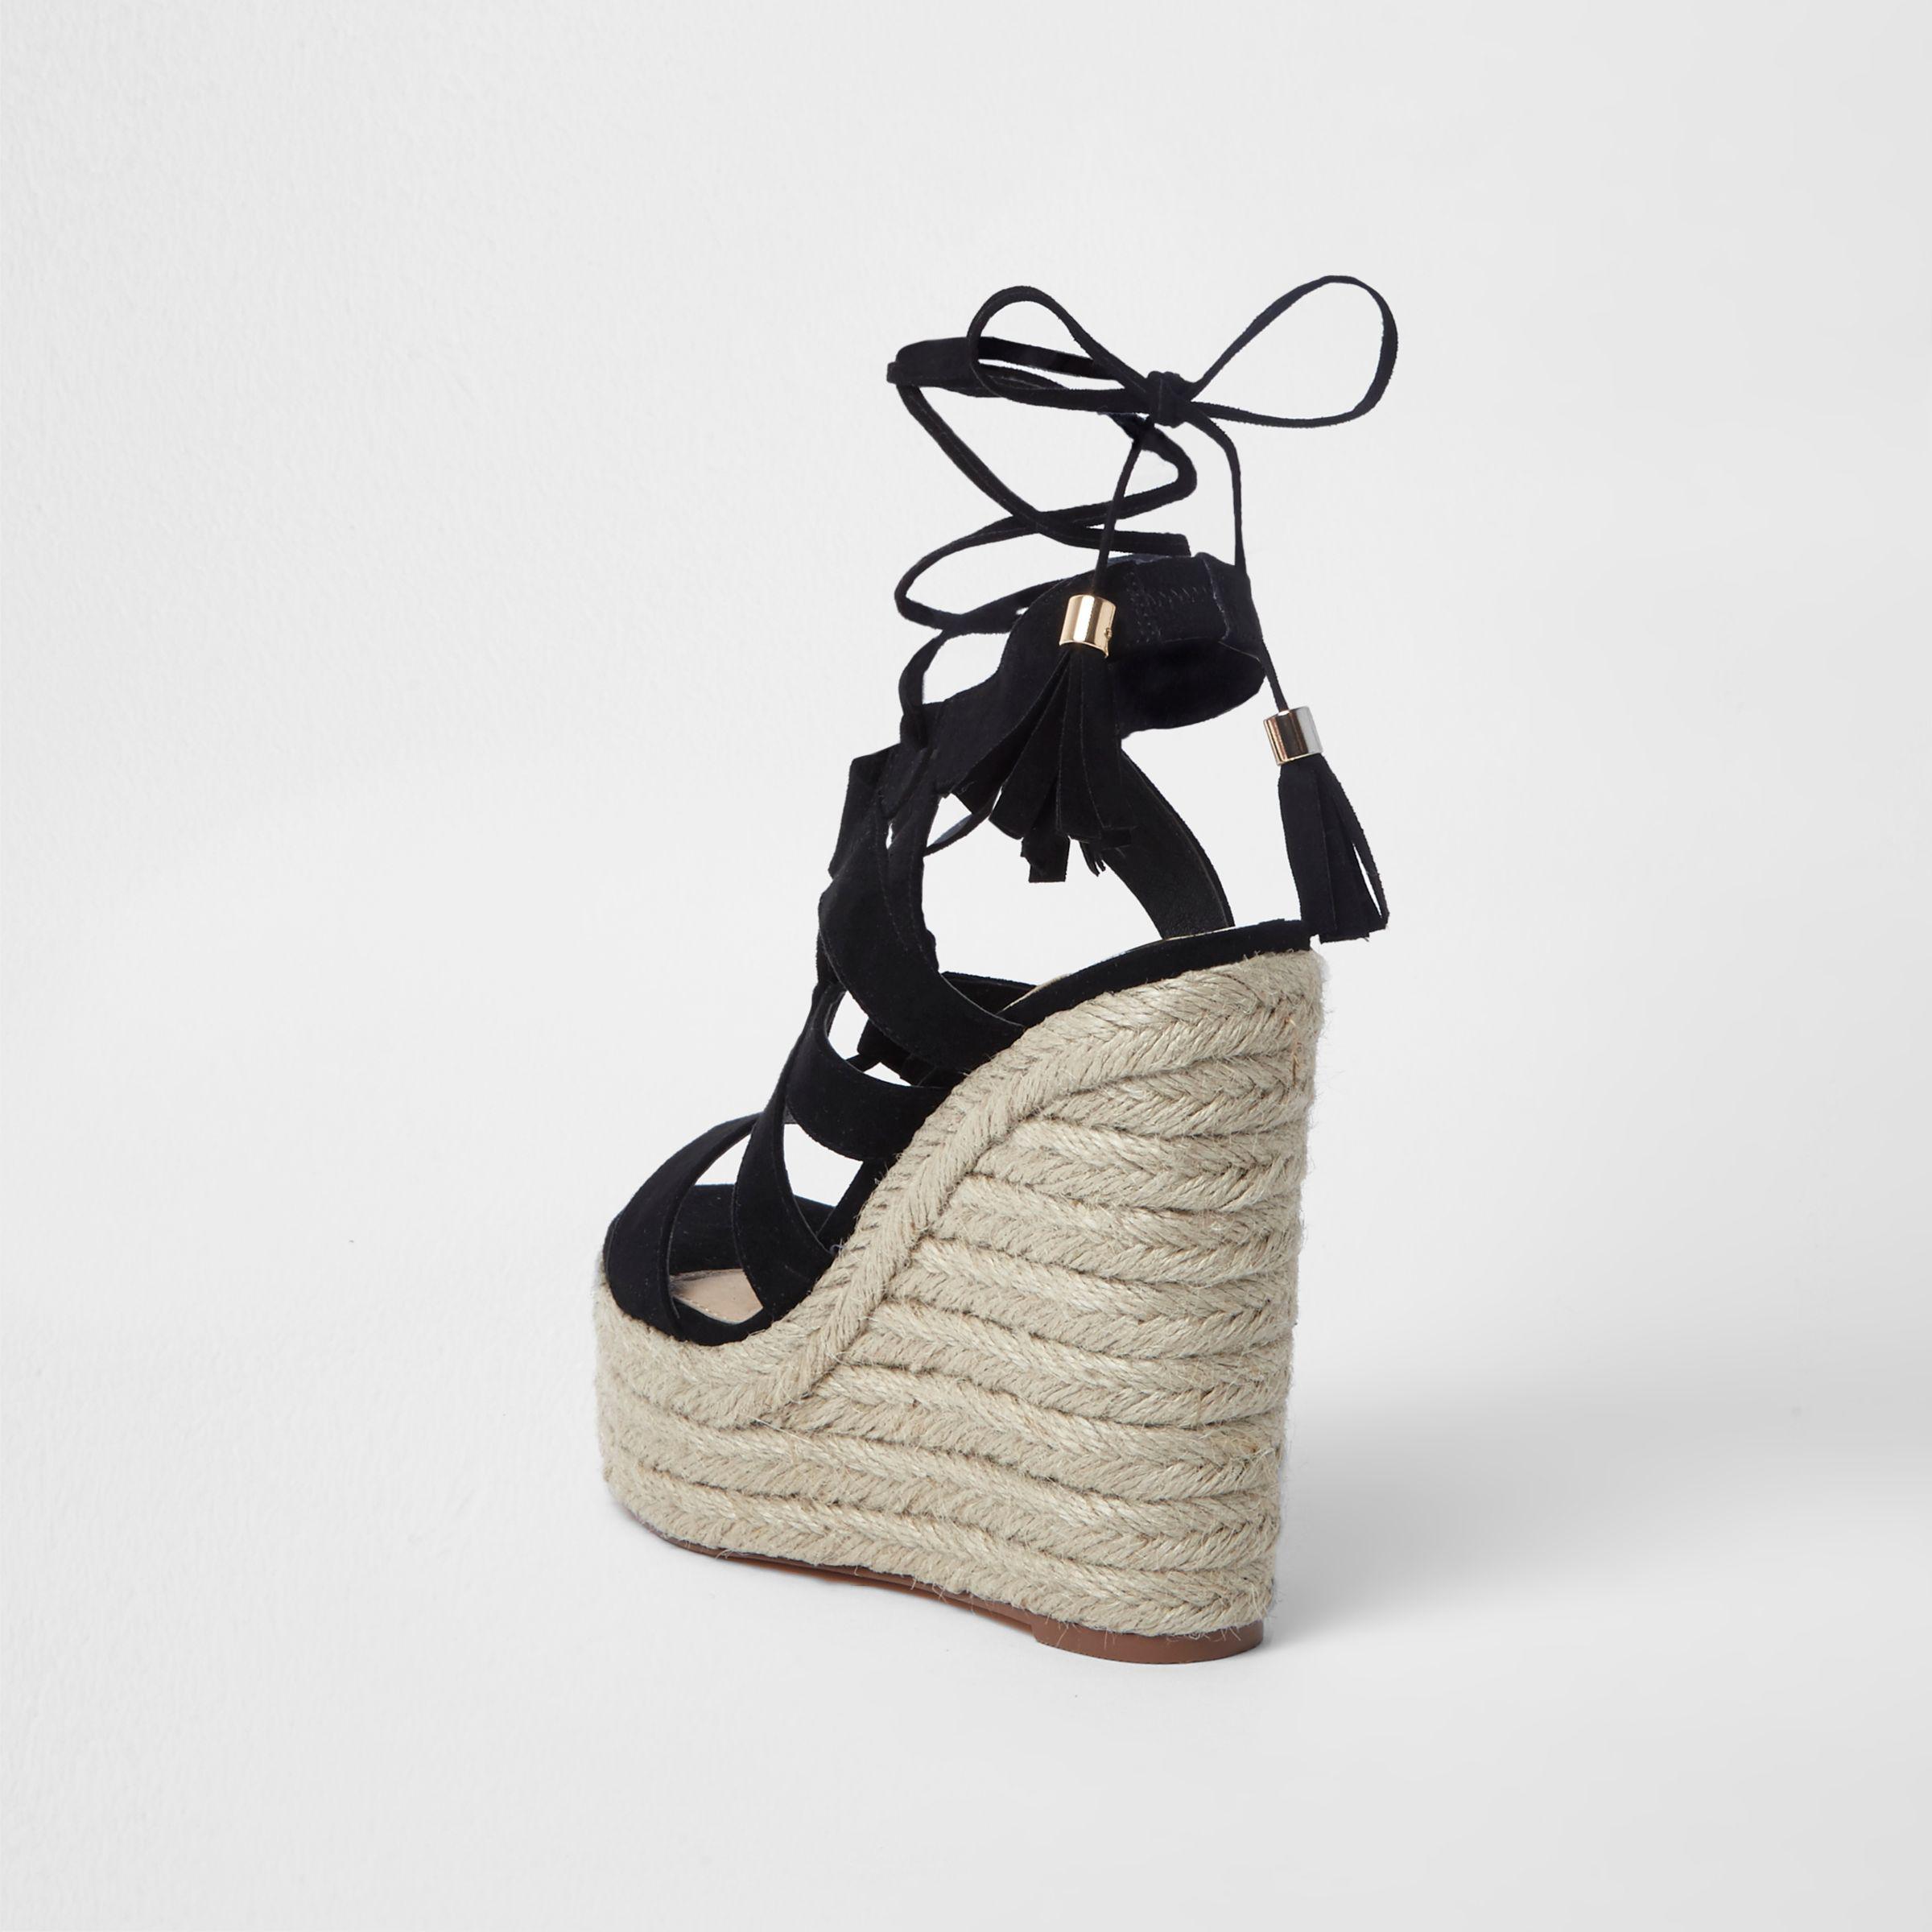 River Island Suede Lace-up Espadrille Wedges Sandals in Black - Lyst